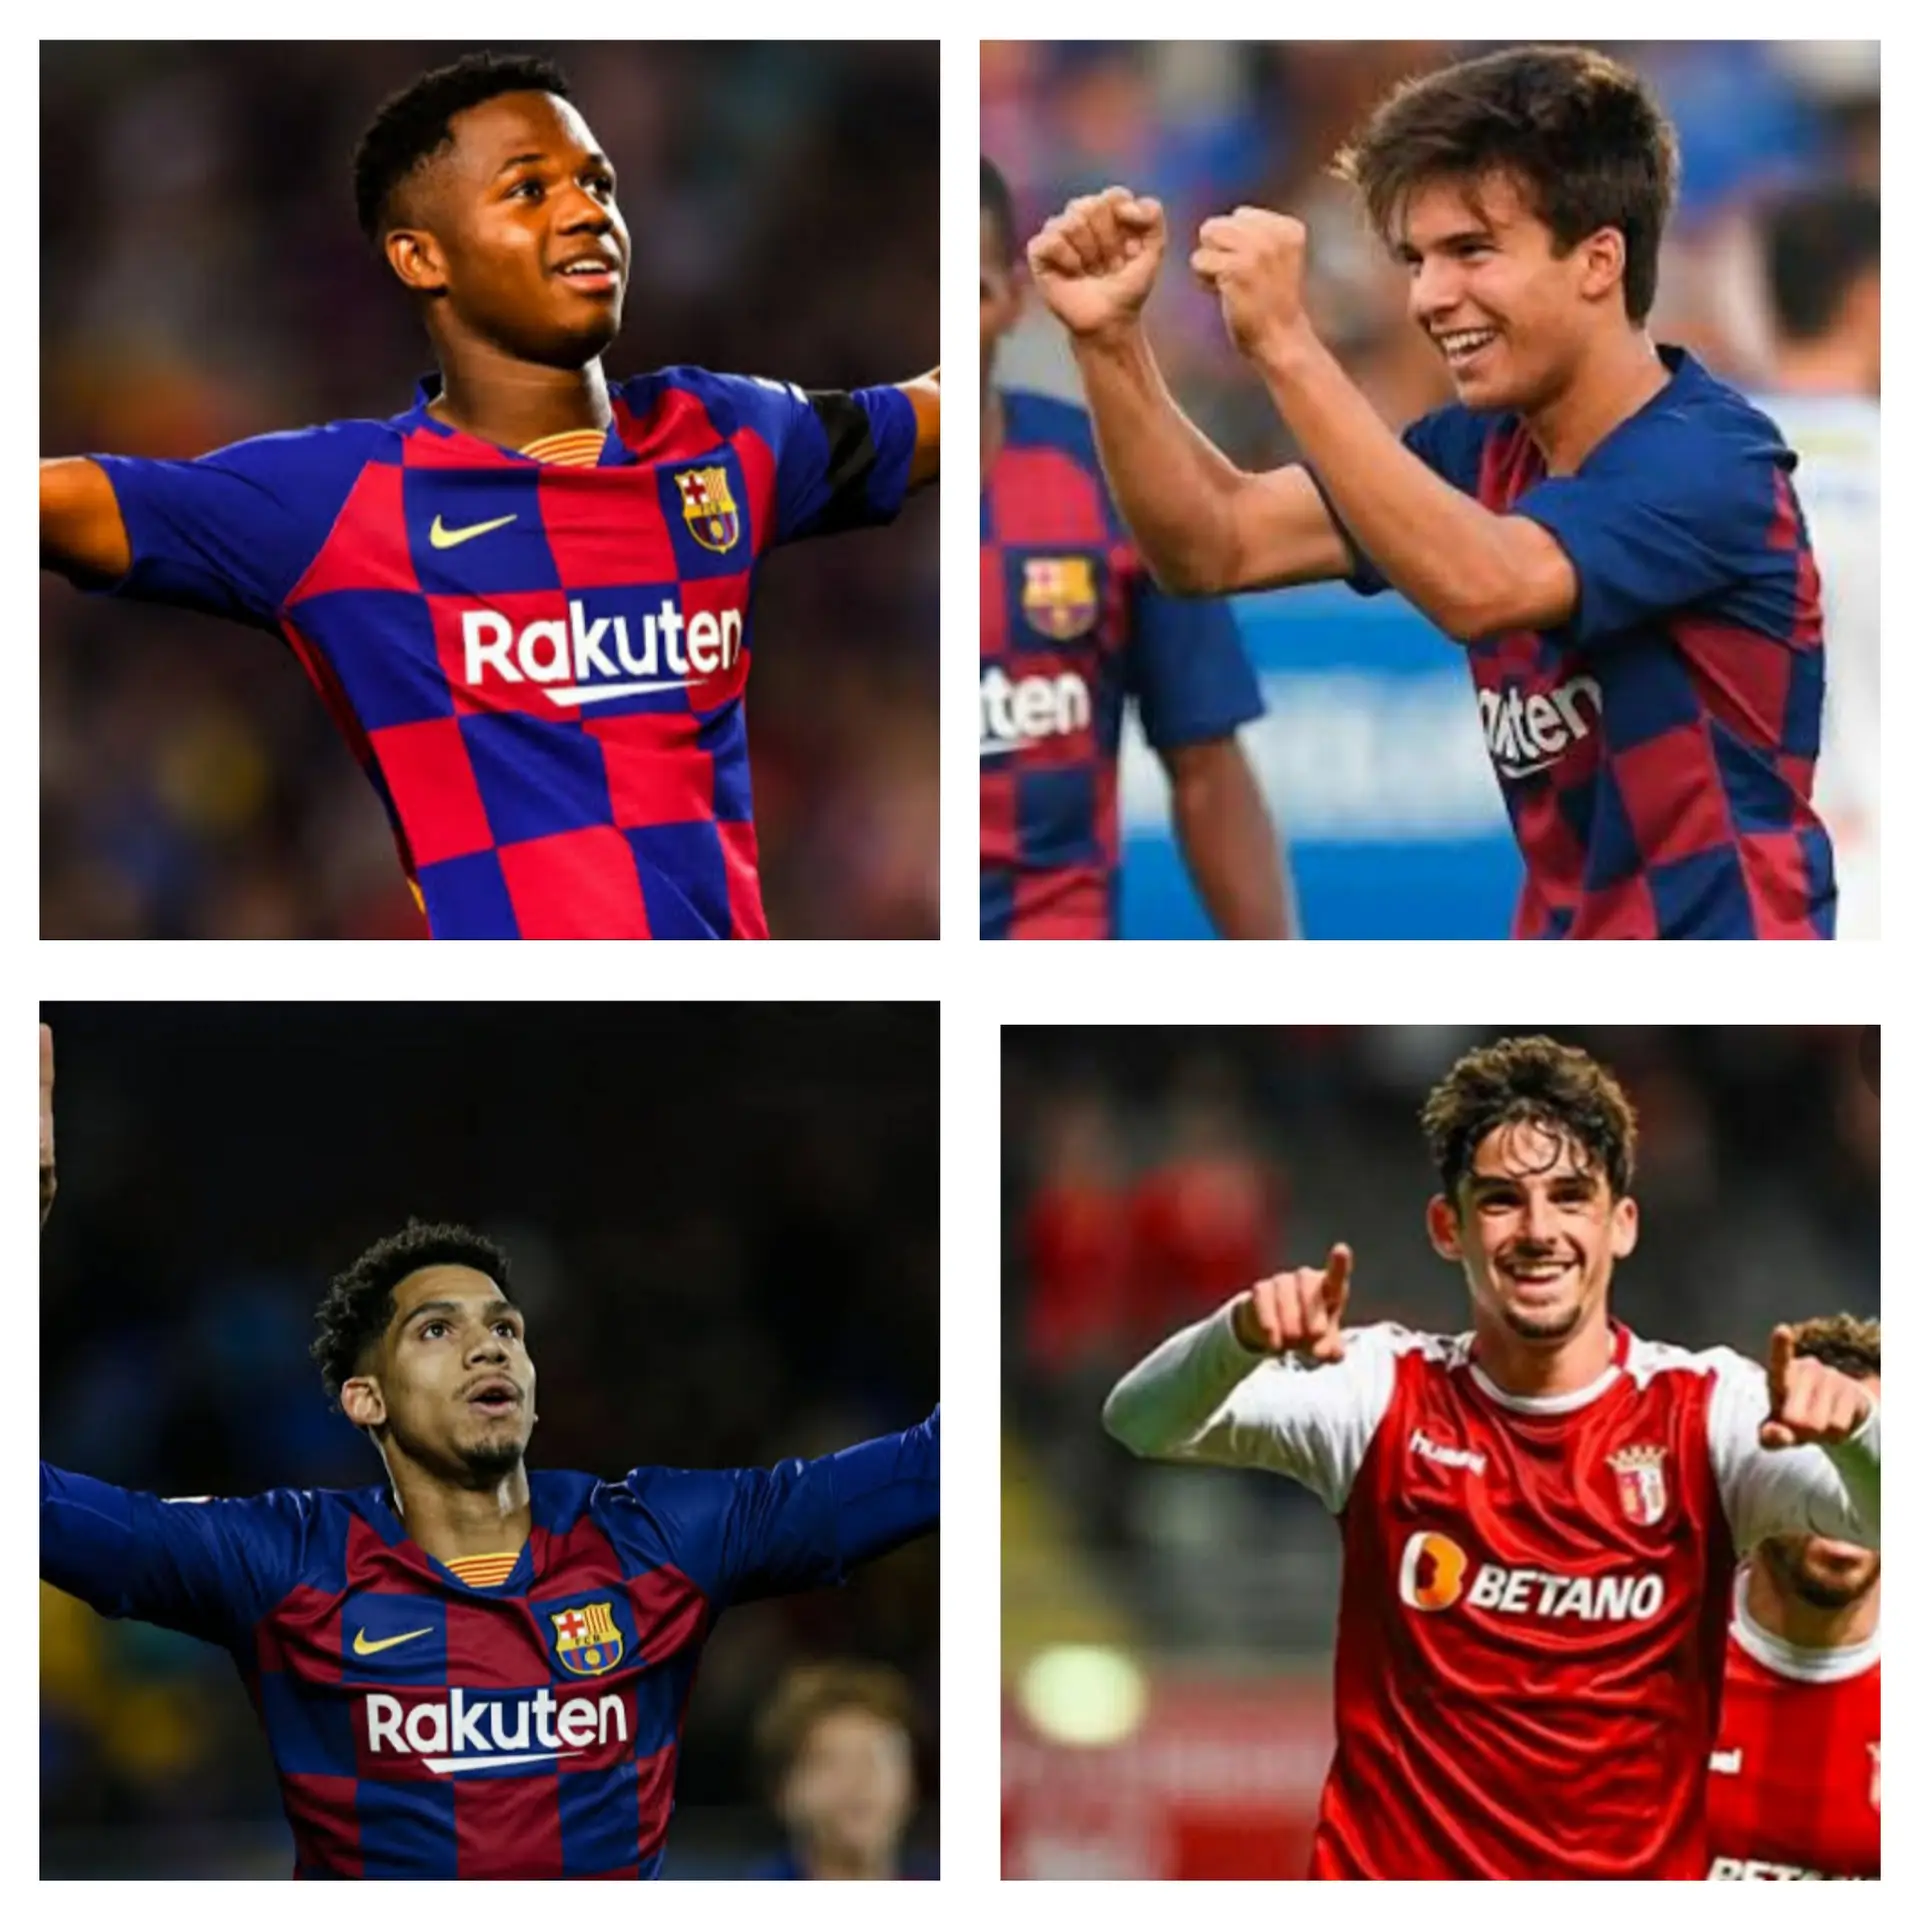 TRANSFERS AND CHANGES NEEDED NOW AT CAMP NOU